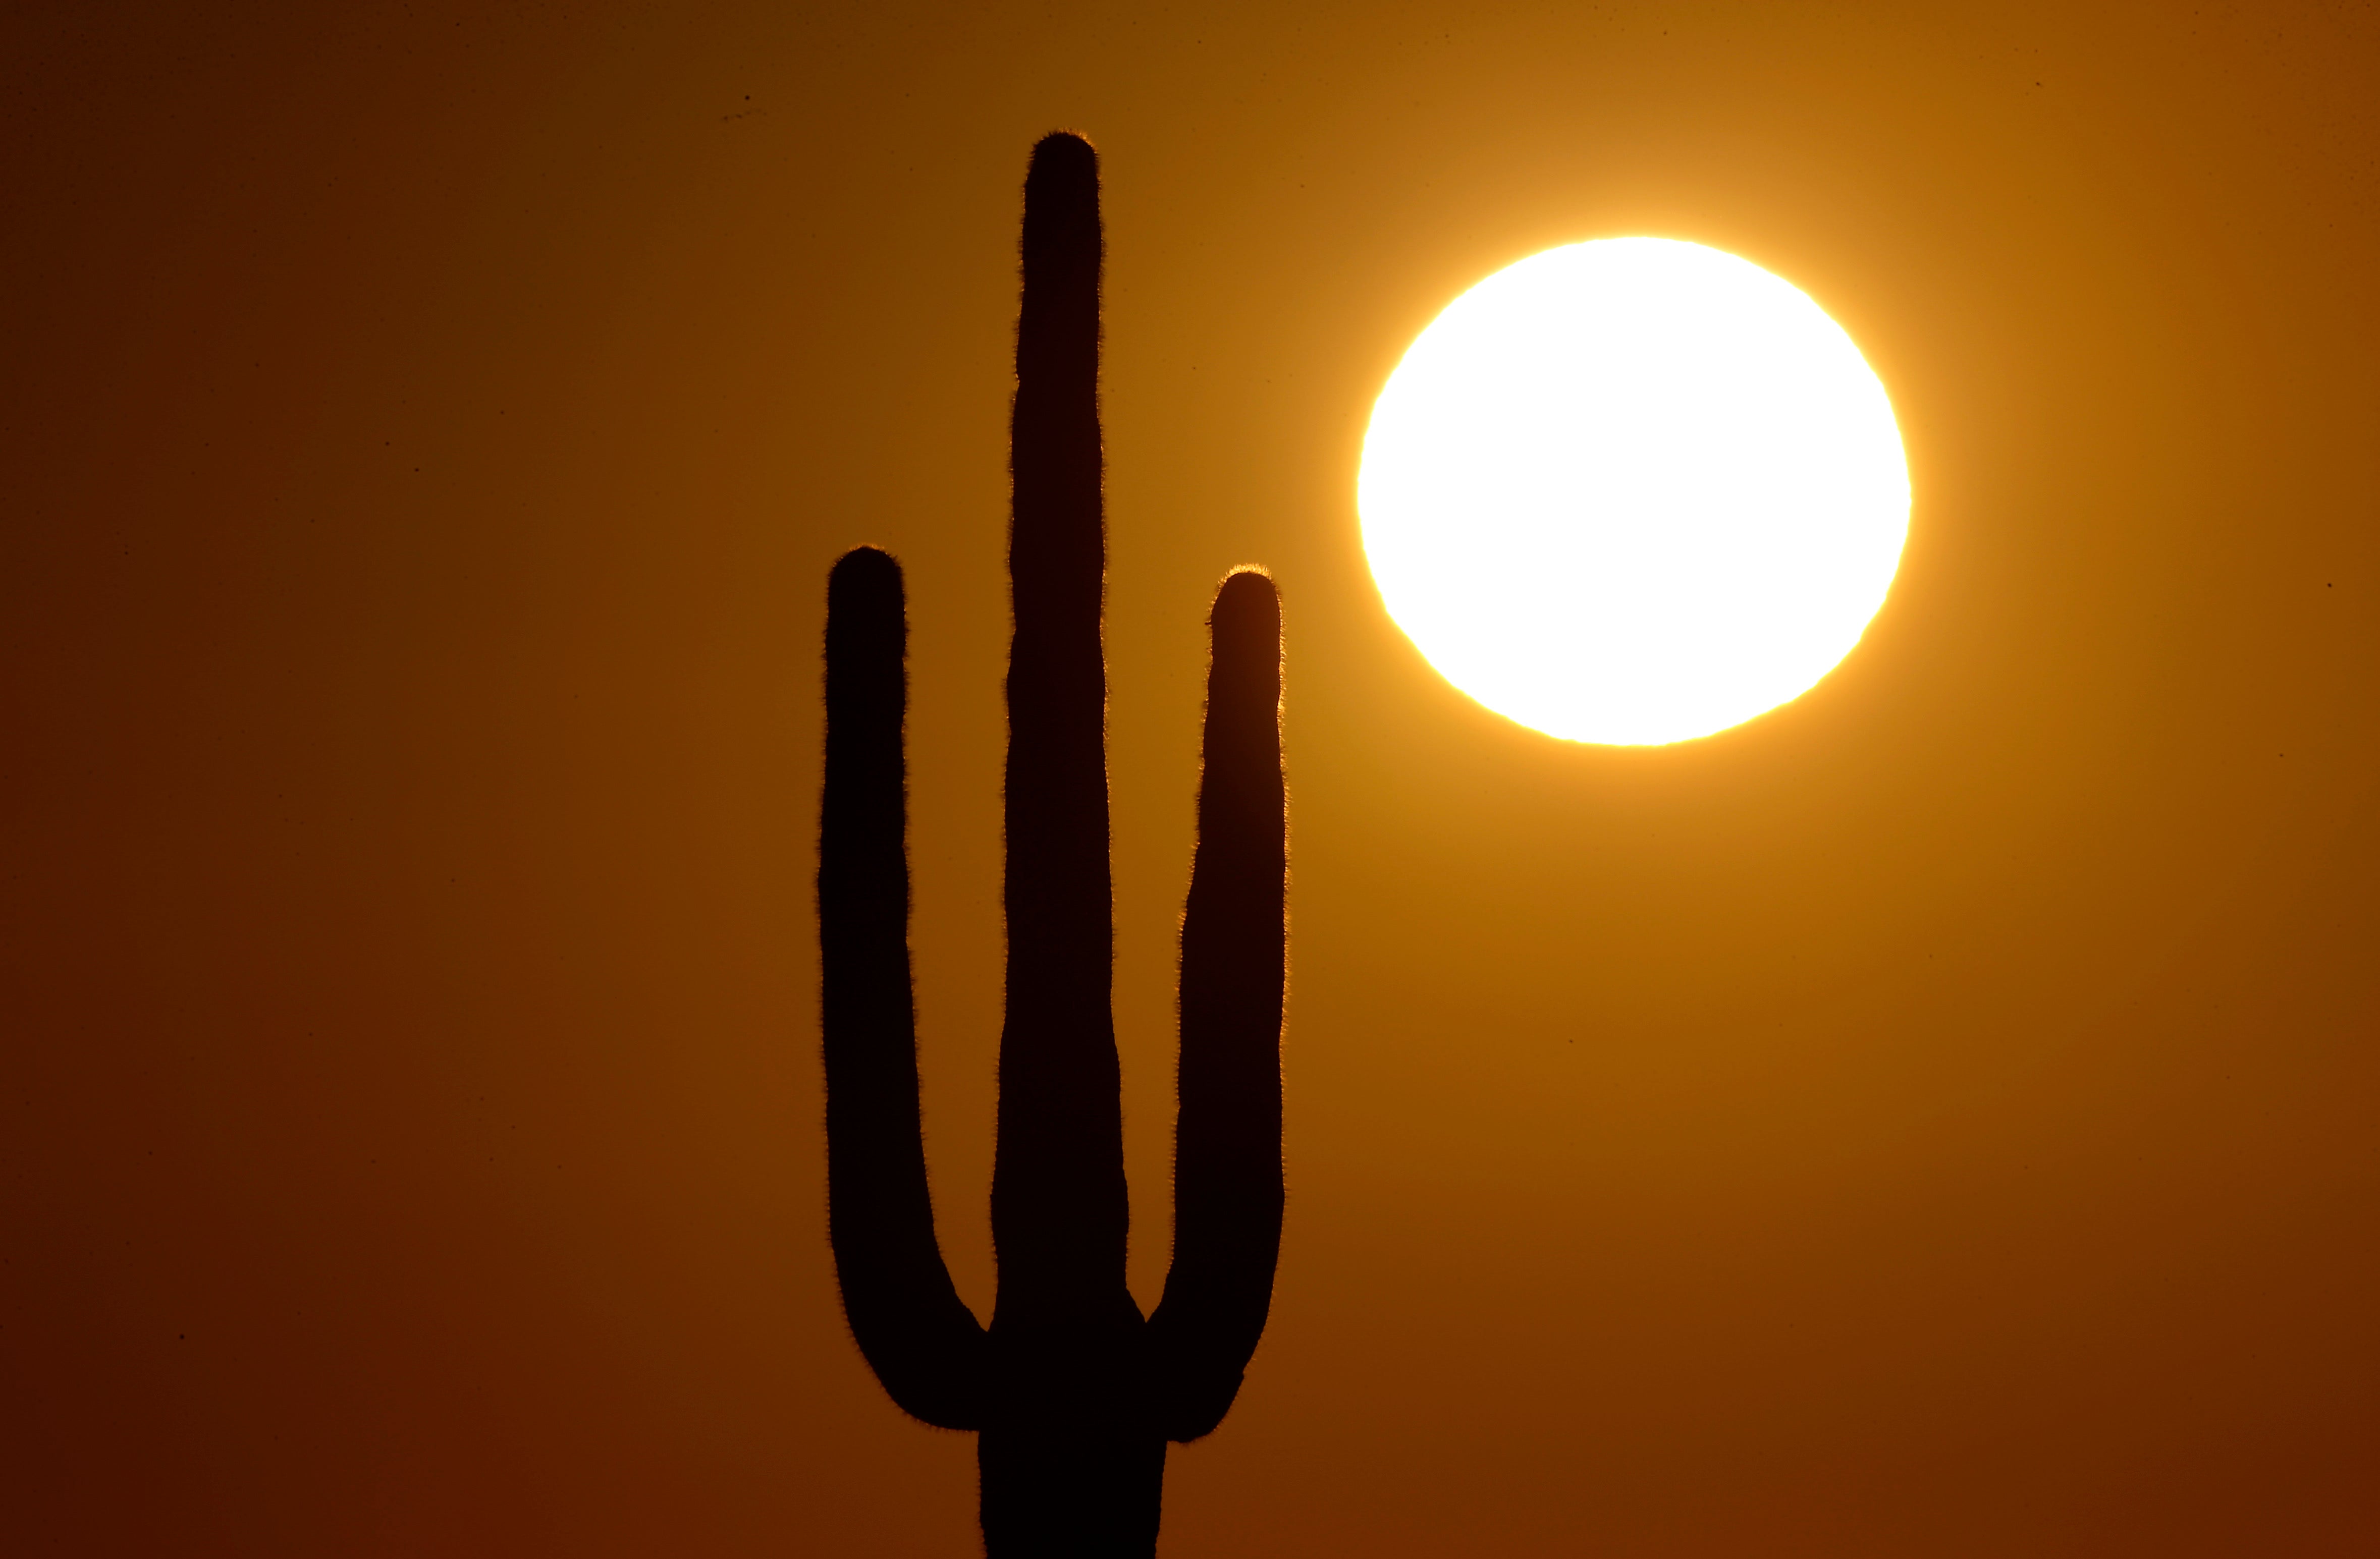 A saguaro cactus stands against the rising sun in the desert north of Phoenix